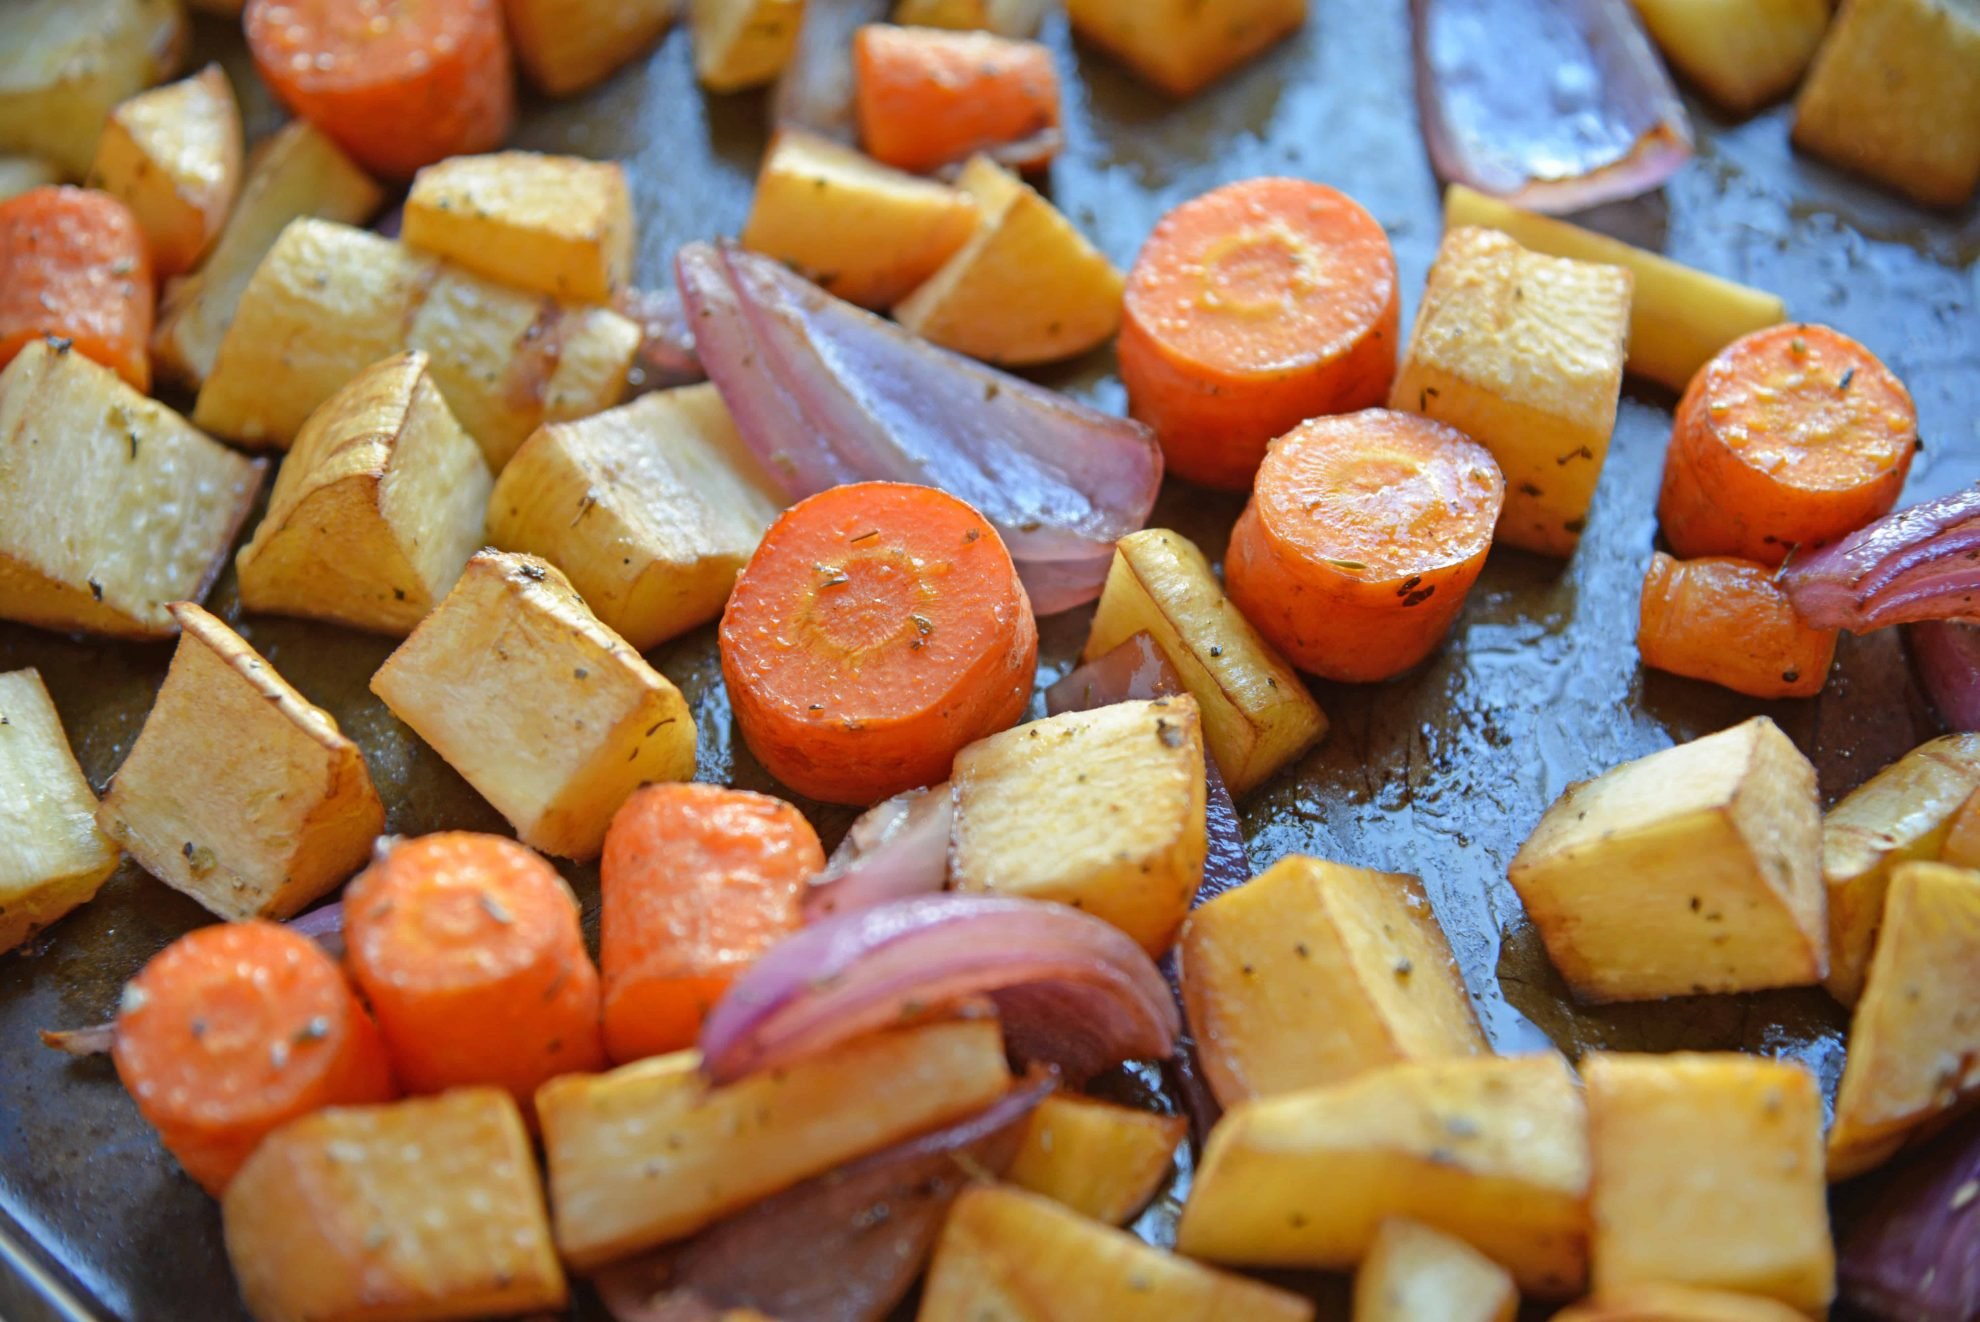 Balsamic Roasted Root Vegetables are veggies caramelized with balsamic vinegar and herbs for a crispy exterior, but smooth interior. #howtoroastvegetables #balsamicroastedrootvegetables #roastvegetables www.savoryexperiments.com 